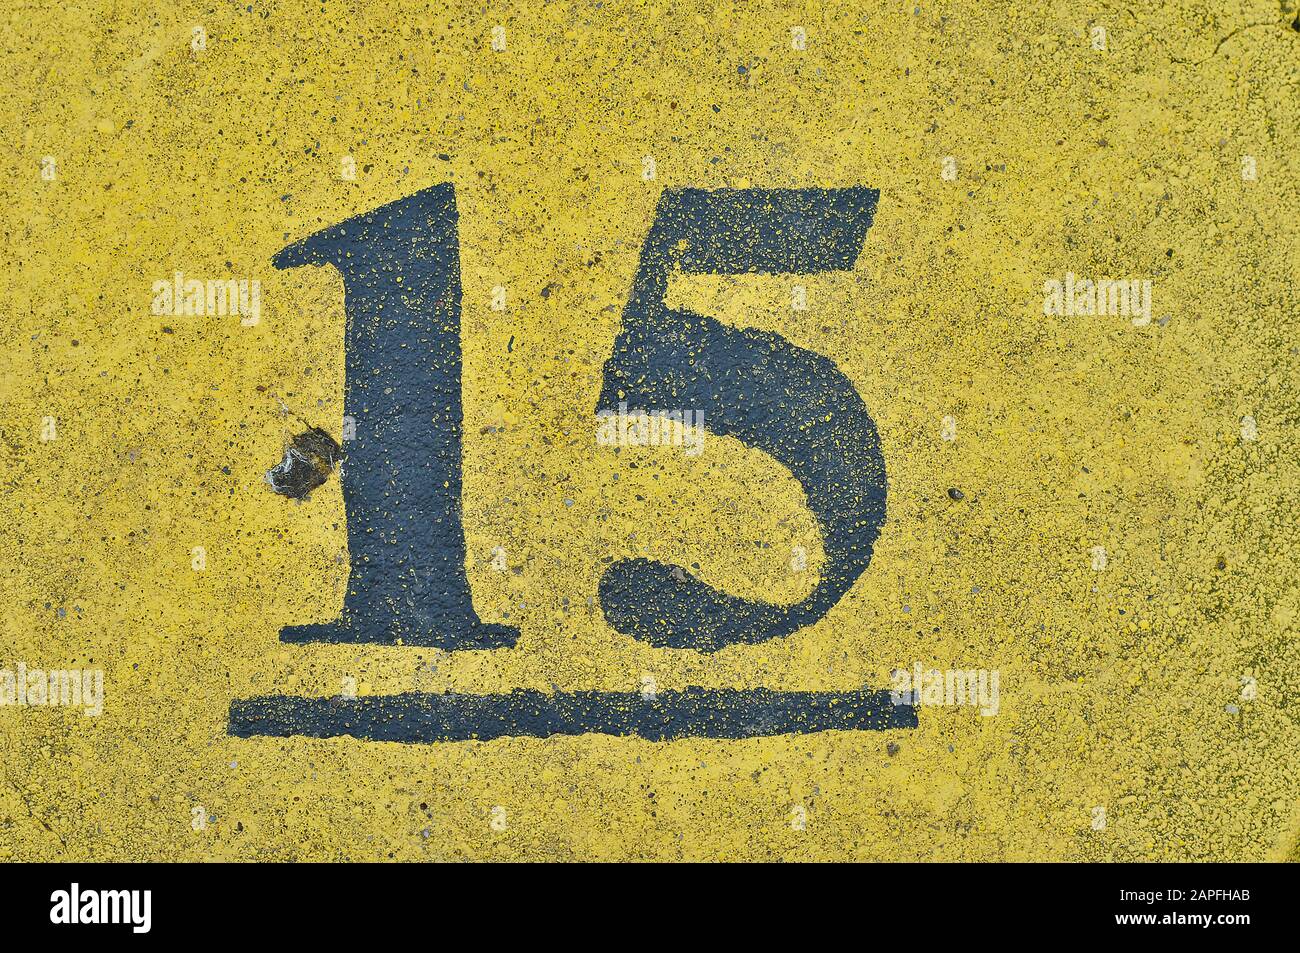 A blue house number plaque, showing the white coloured number fifteen (15) Stock Photo